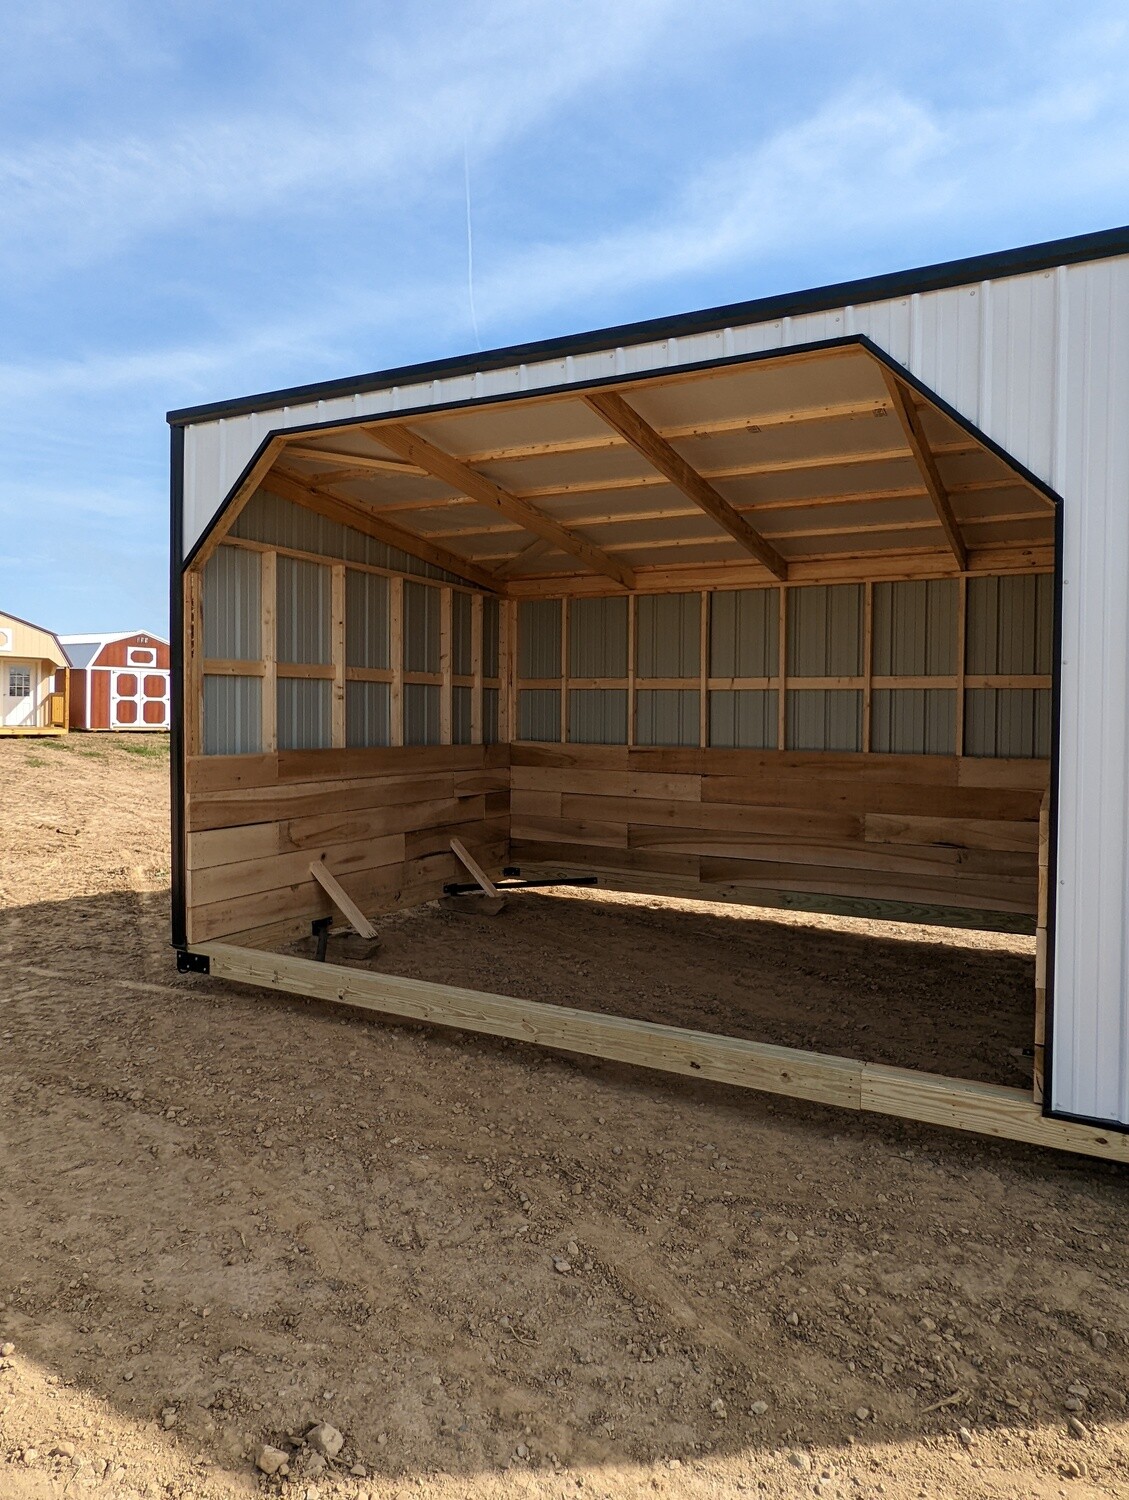 8' x 16' Horse Run-in Structures